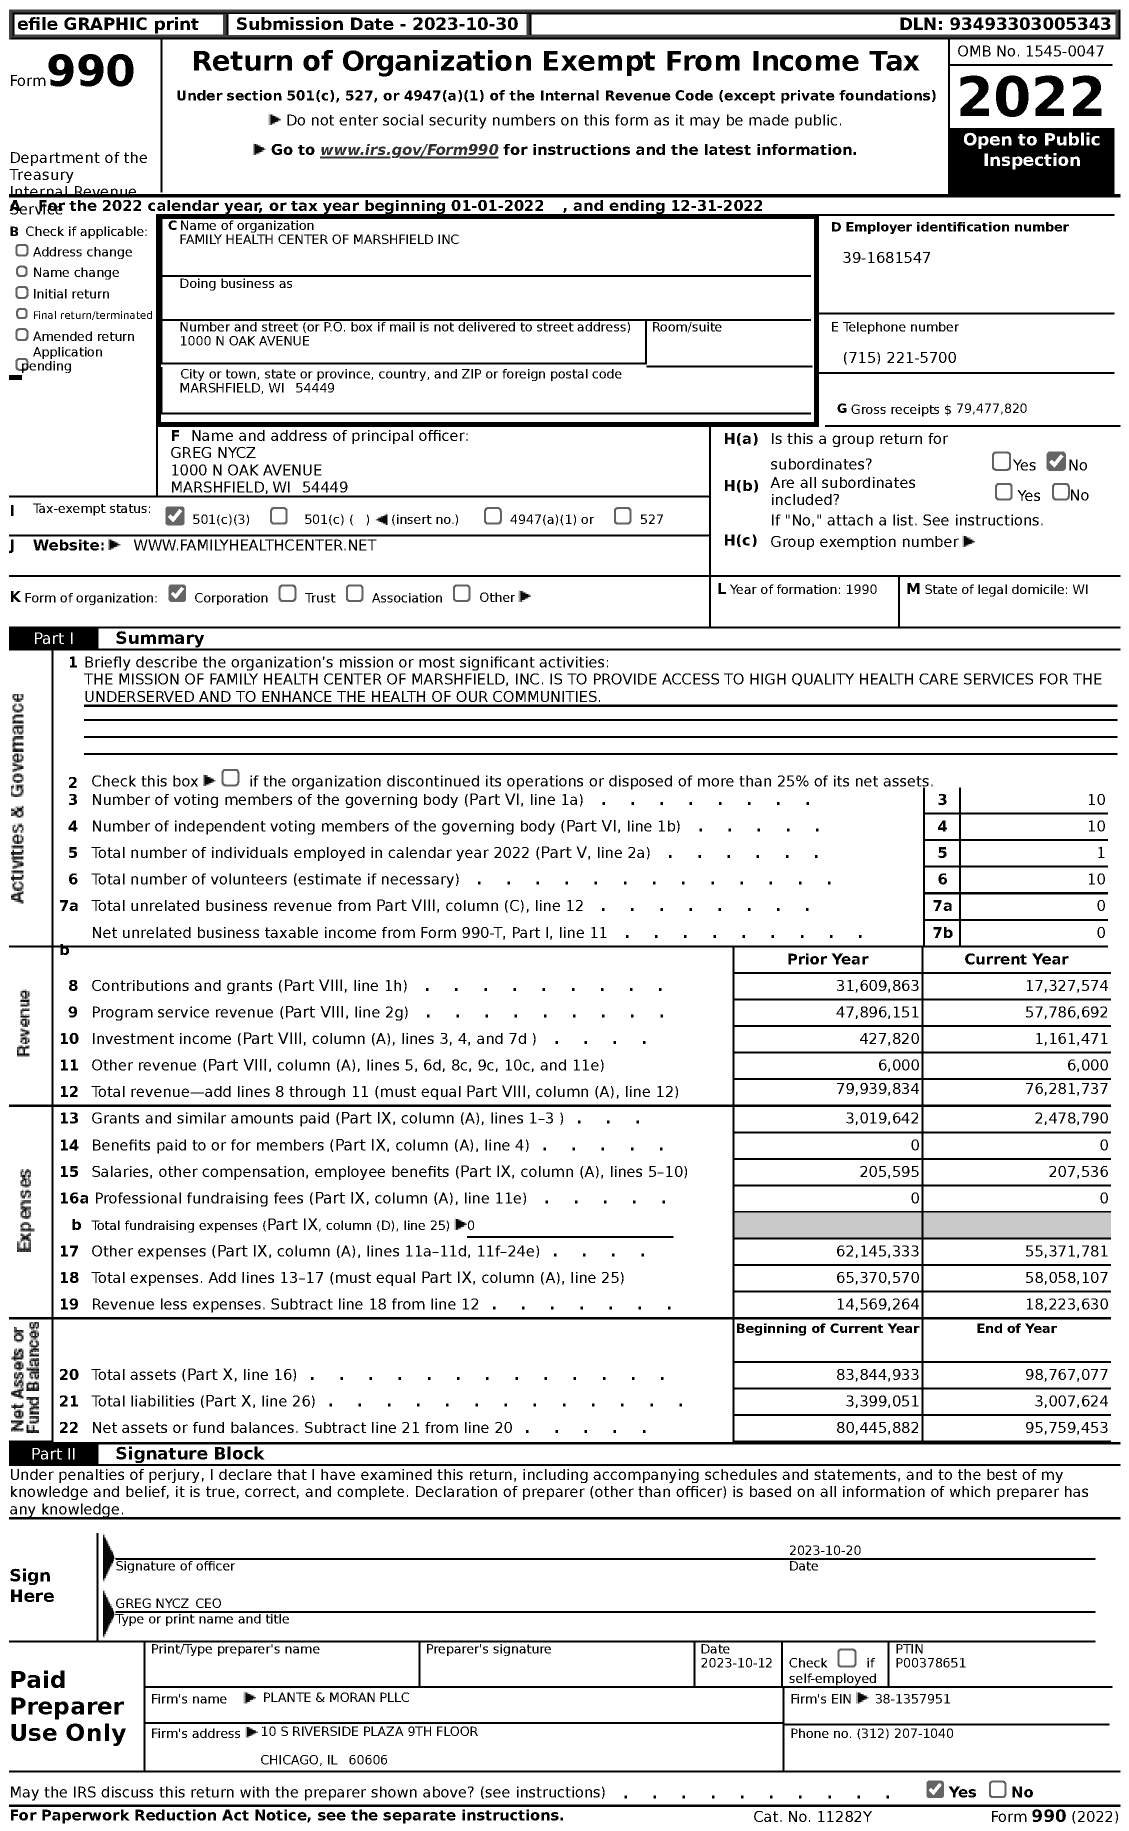 Image of first page of 2022 Form 990 for Family Health Center of Marshfield (FHC)